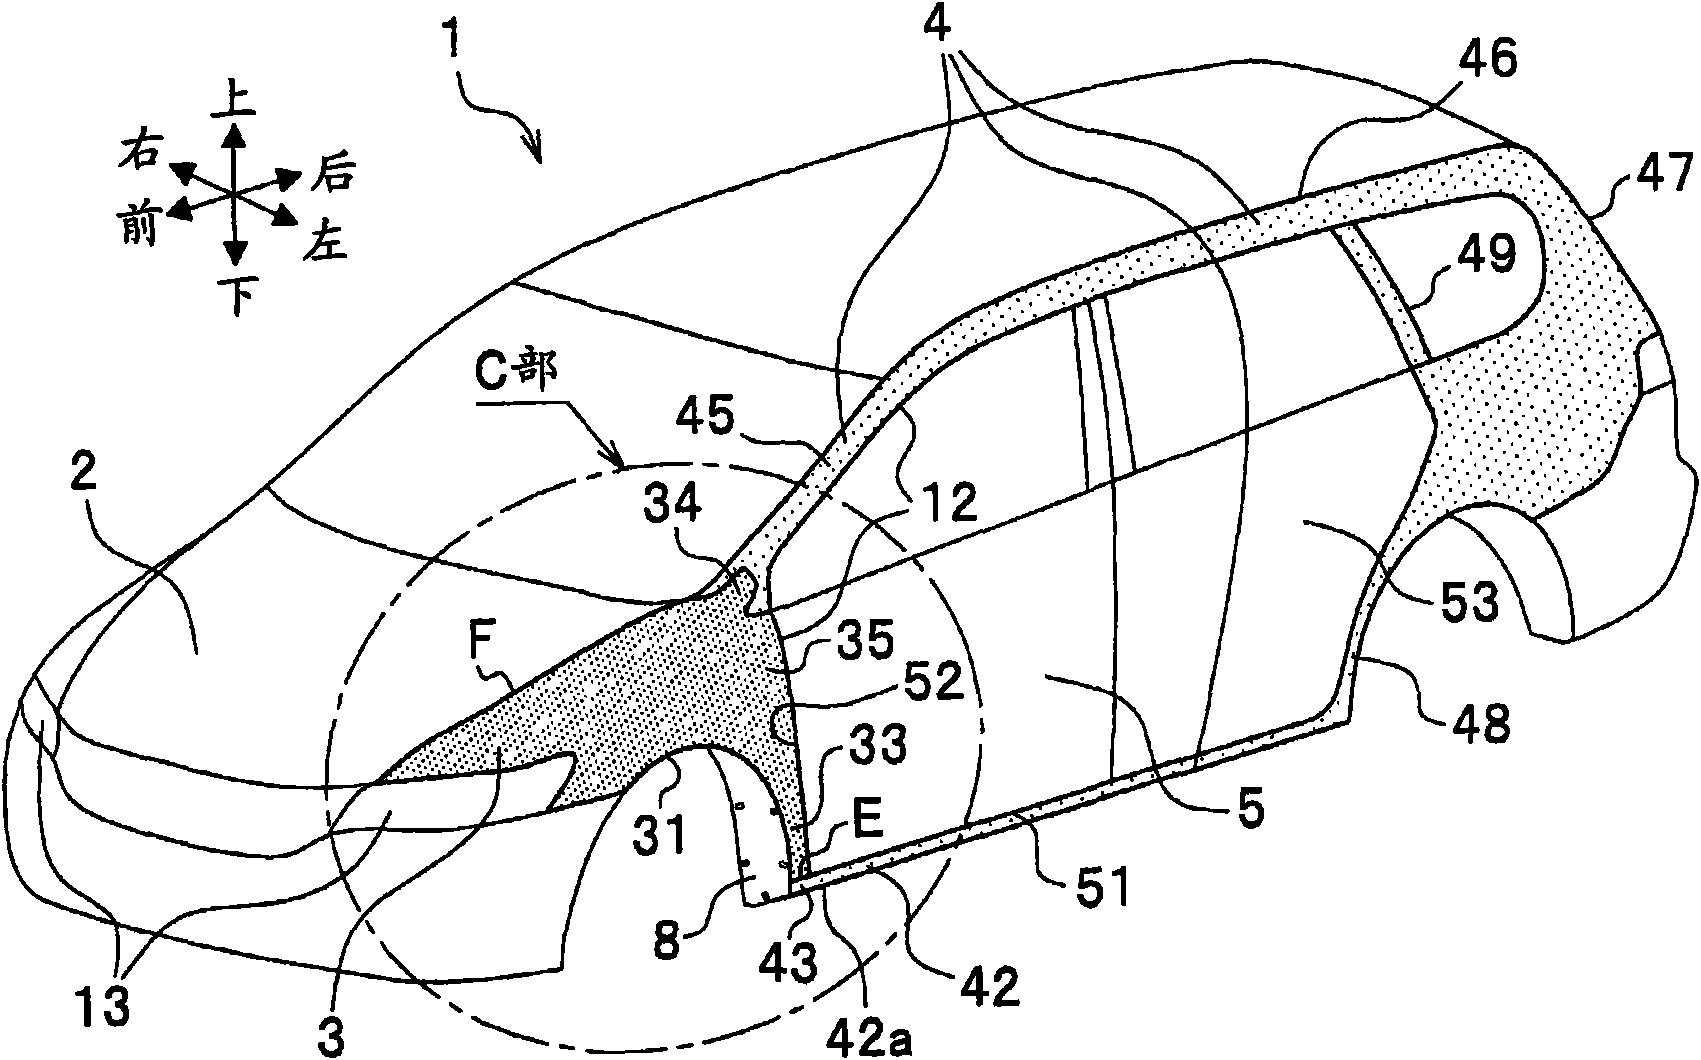 Side structure of automotive body